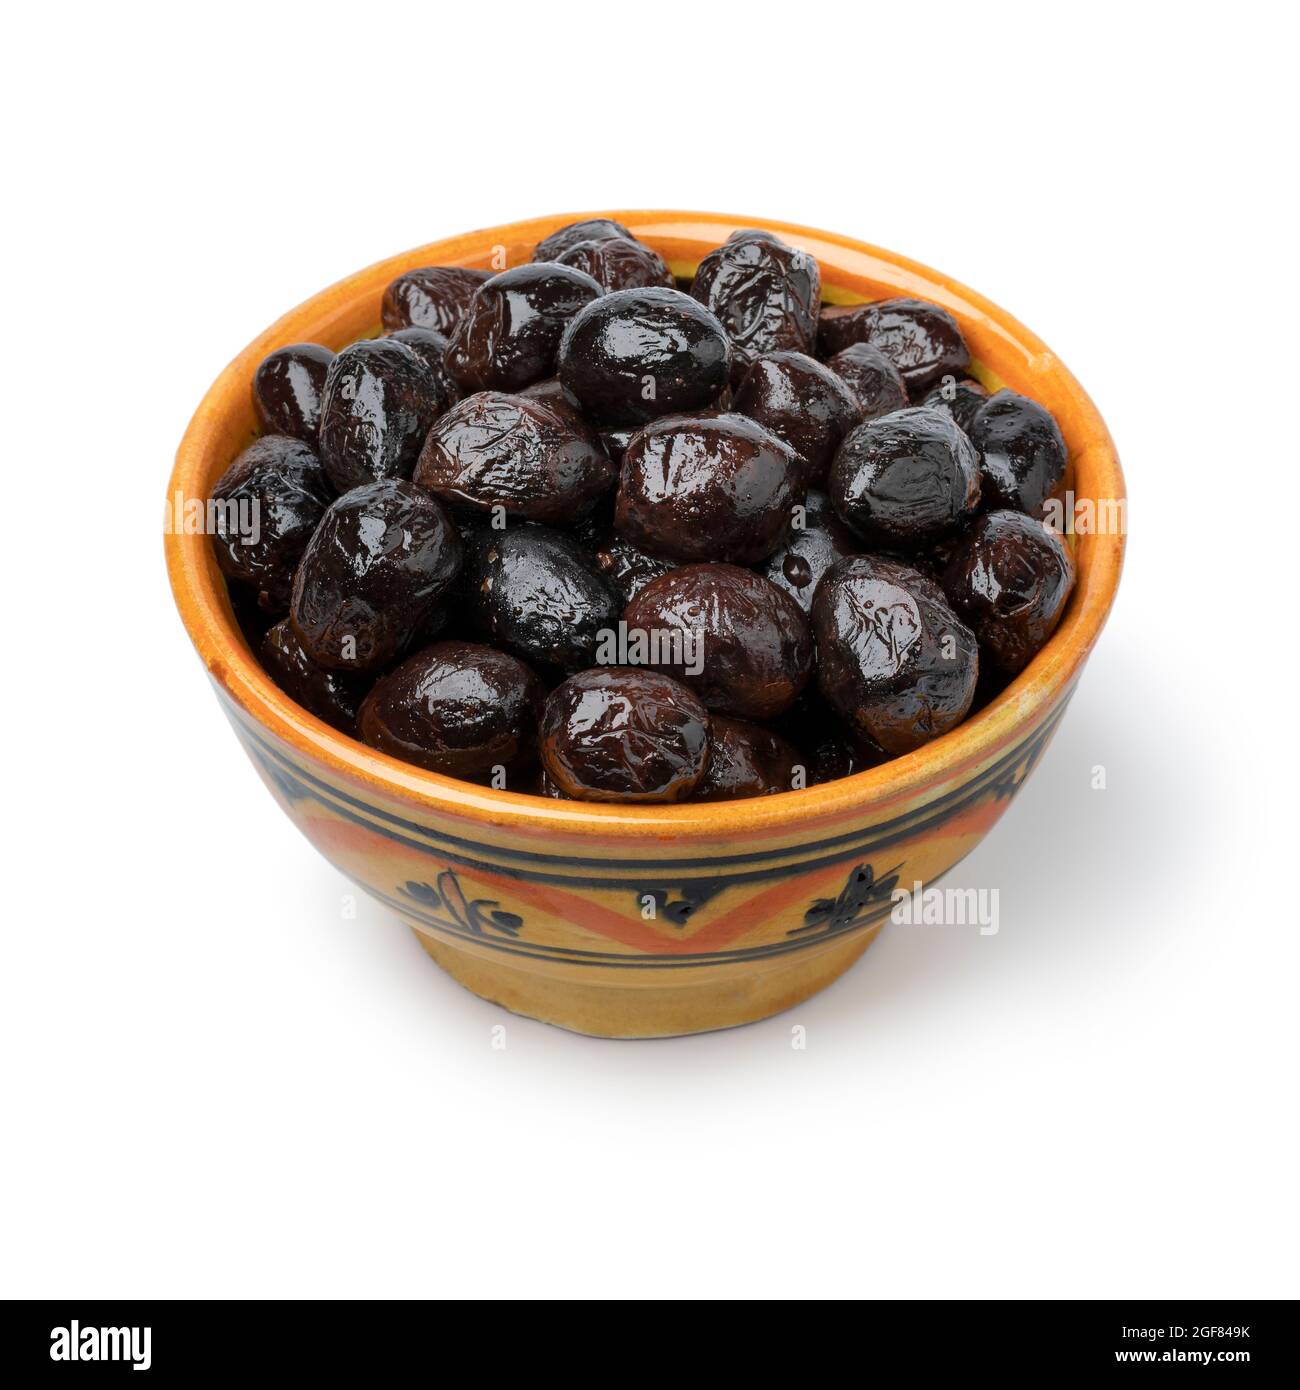 Bowl with traditional Moroccan black breakfast olives close up isolated on white background Stock Photo